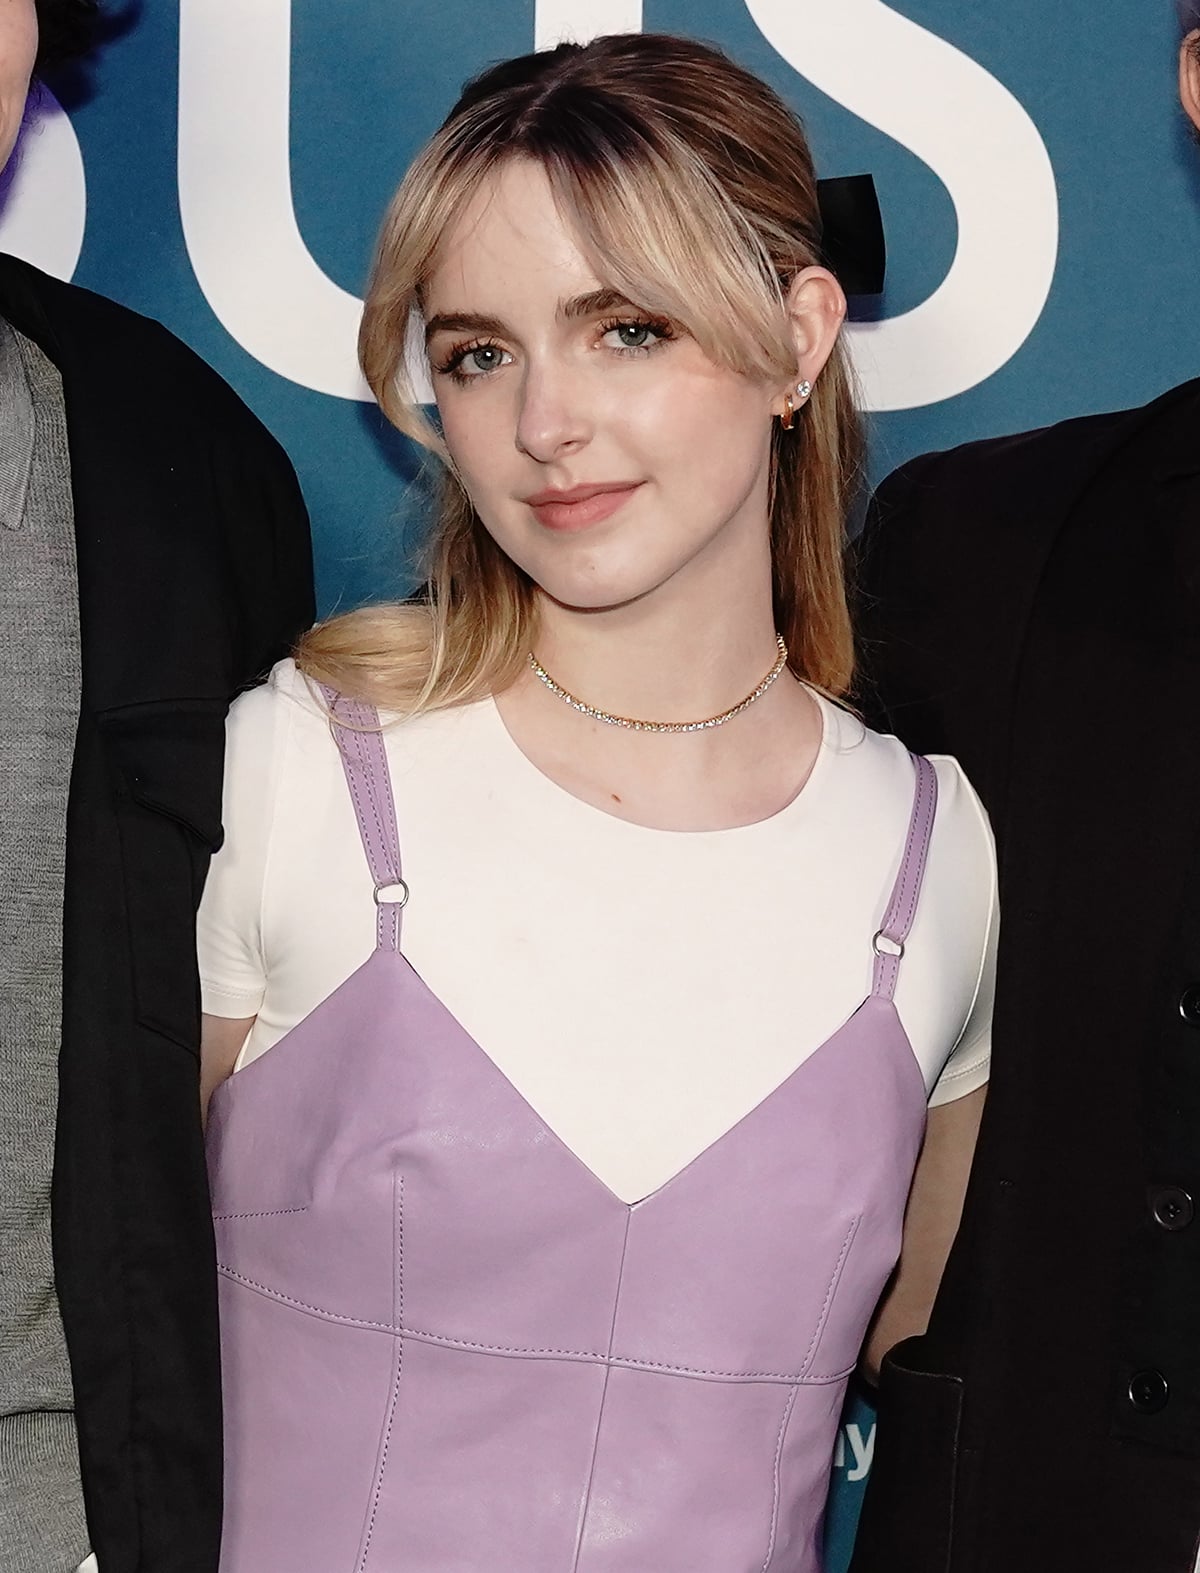 Mckenna Grace wears her blonde hair in a half-up ponytail with a black bow and highlights her youthful appearance with soft makeup